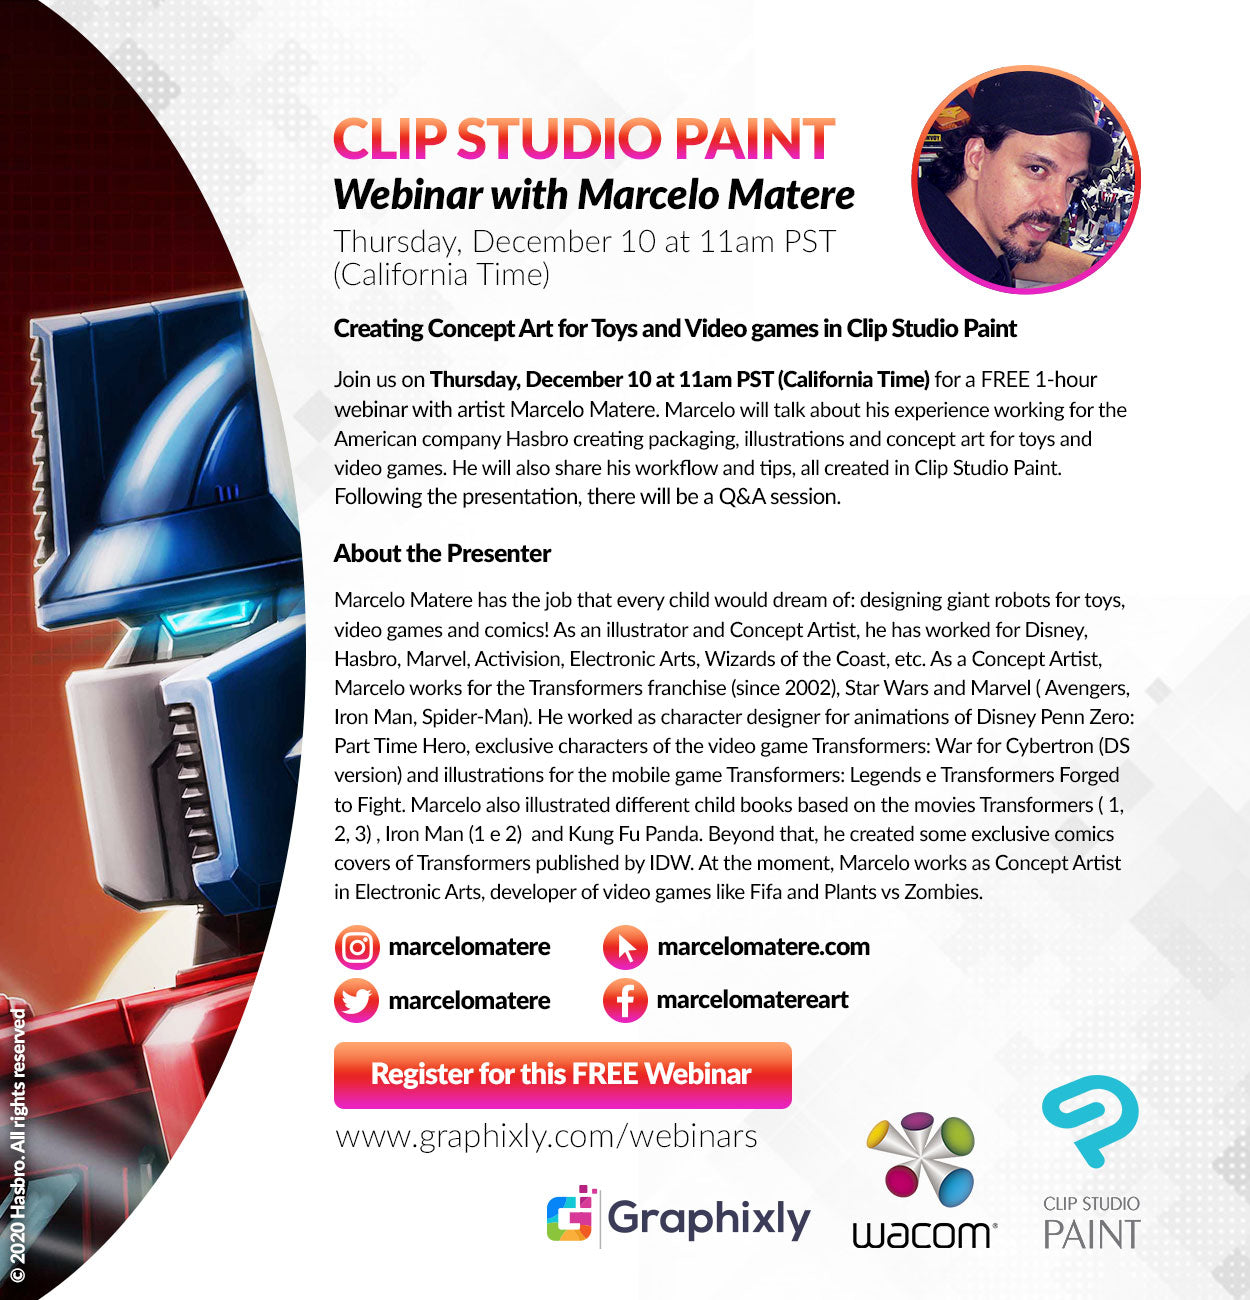 Webinar - Creating Concept Art for Toys and Video games in Clip Studio Paint with Marcelo Matere